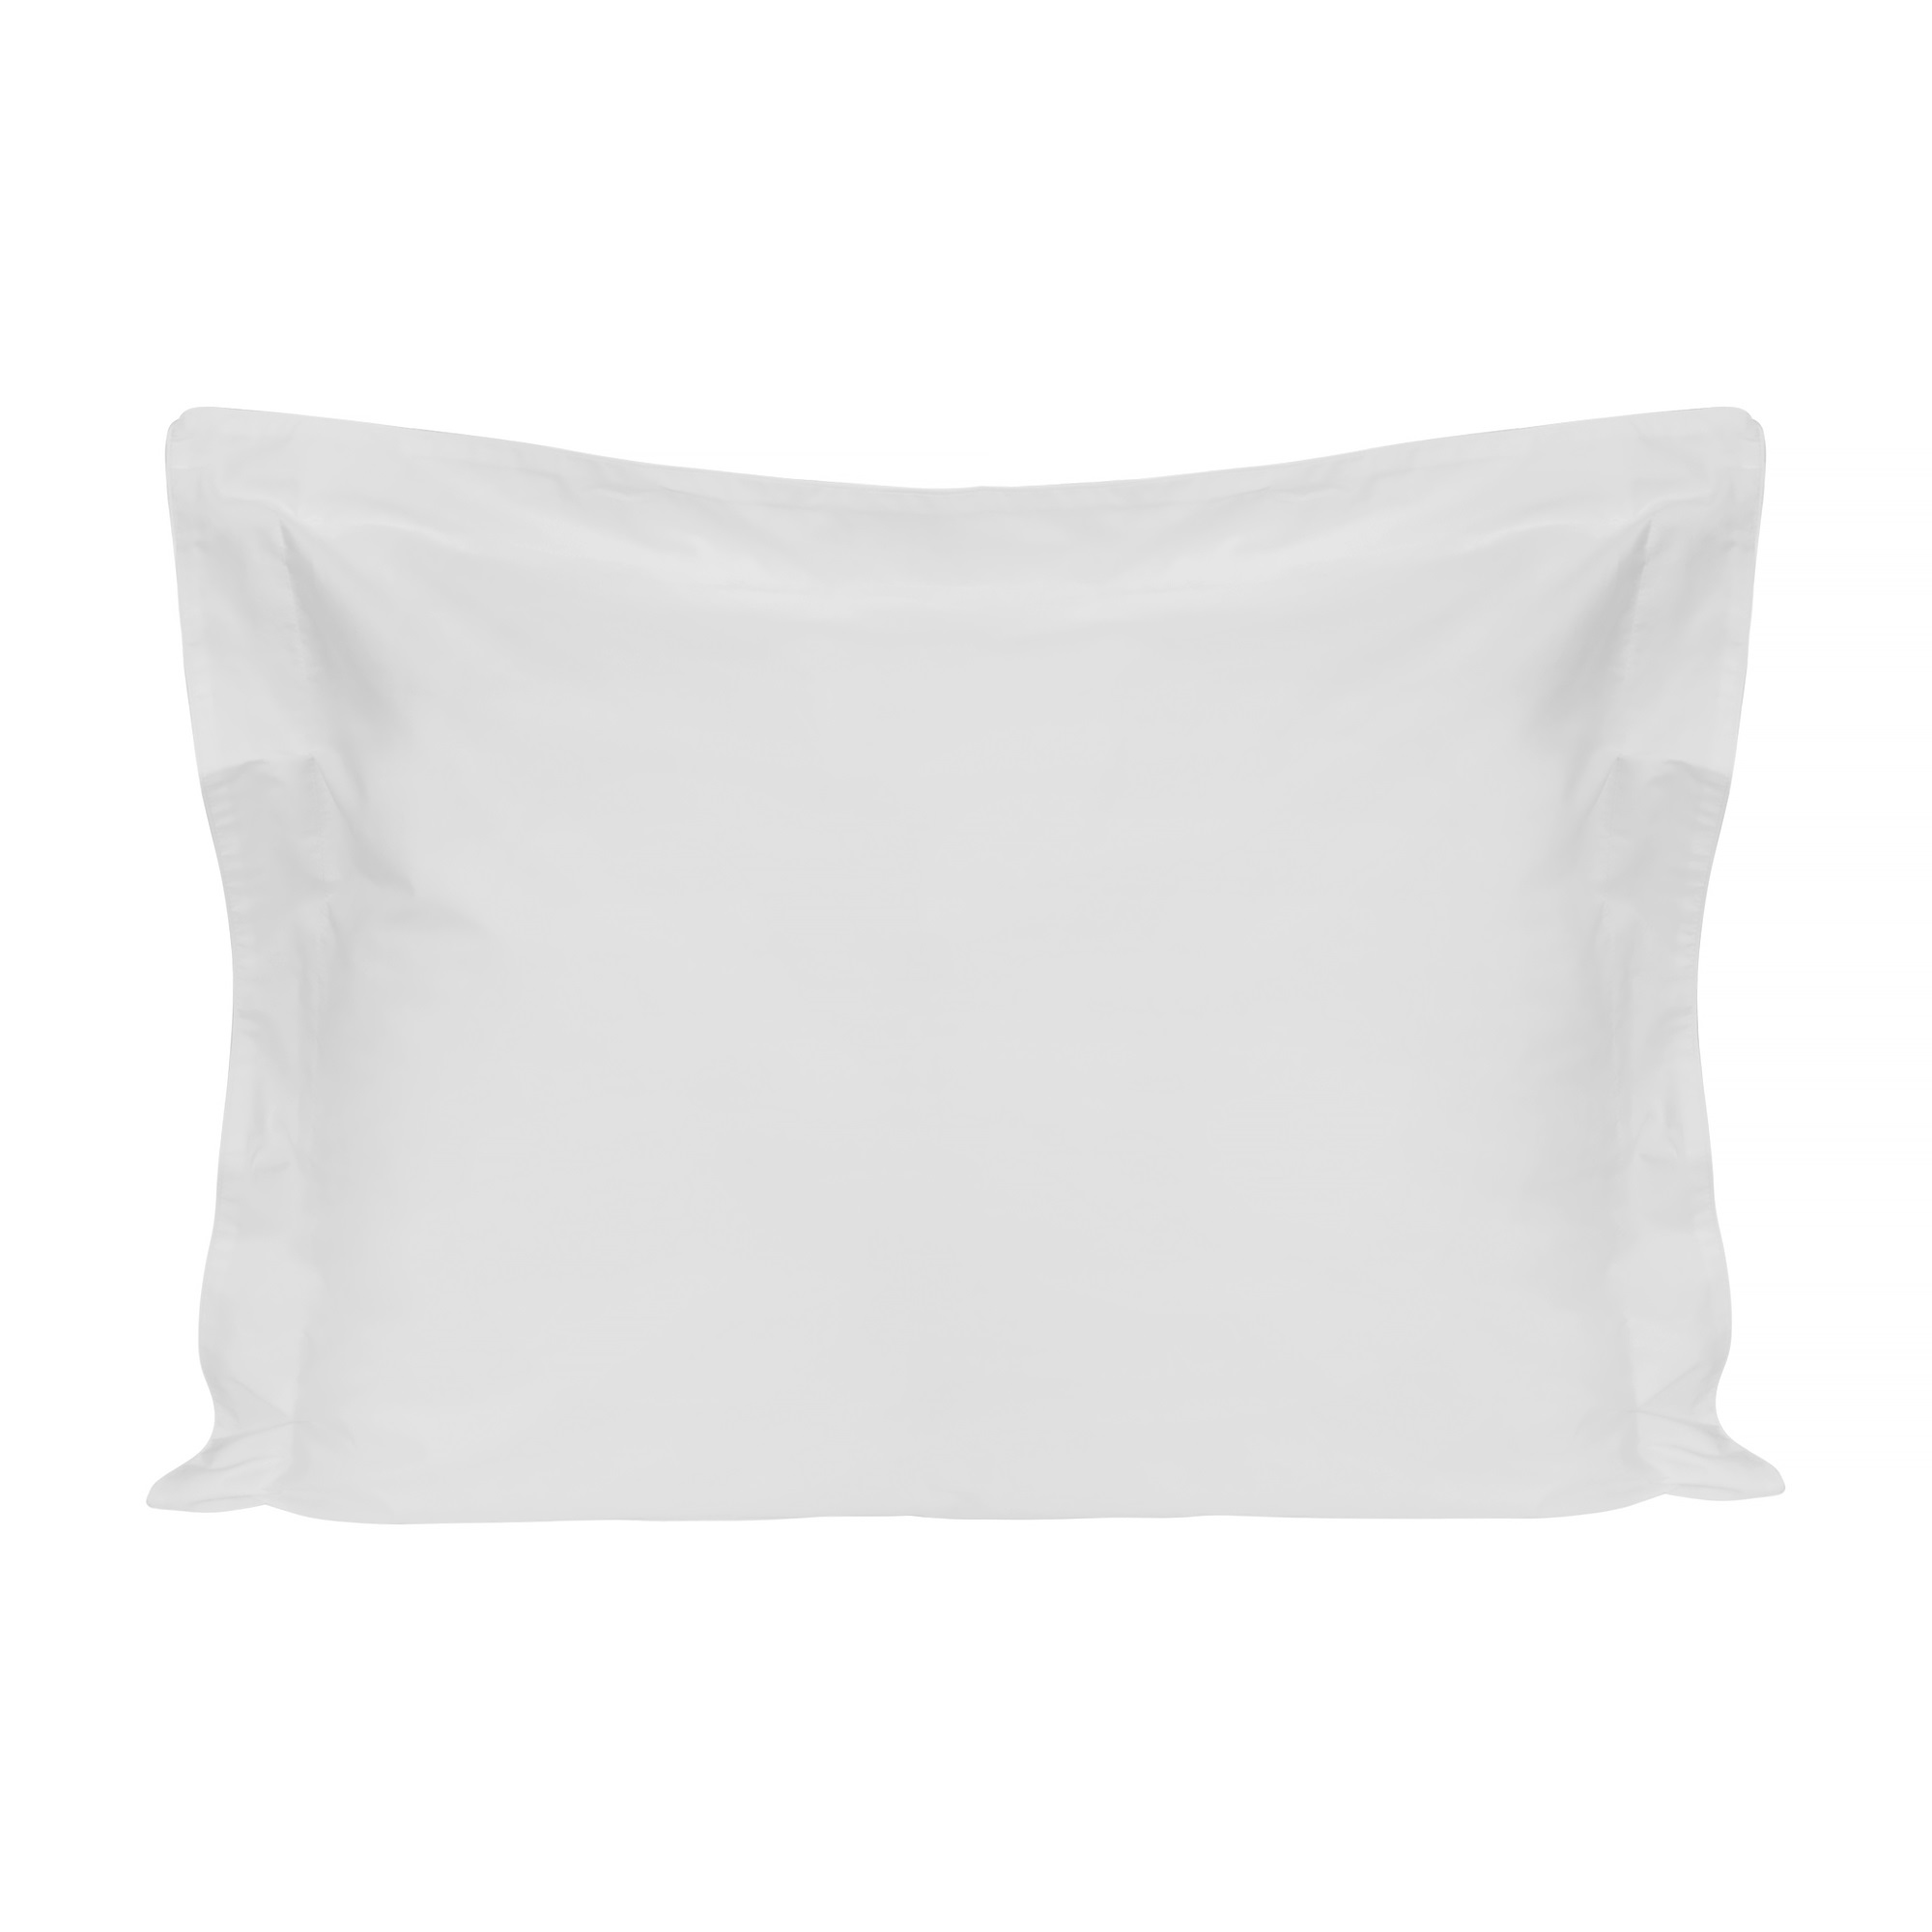 Pillow case Selected by Bed & Bath 50x60 cm, White